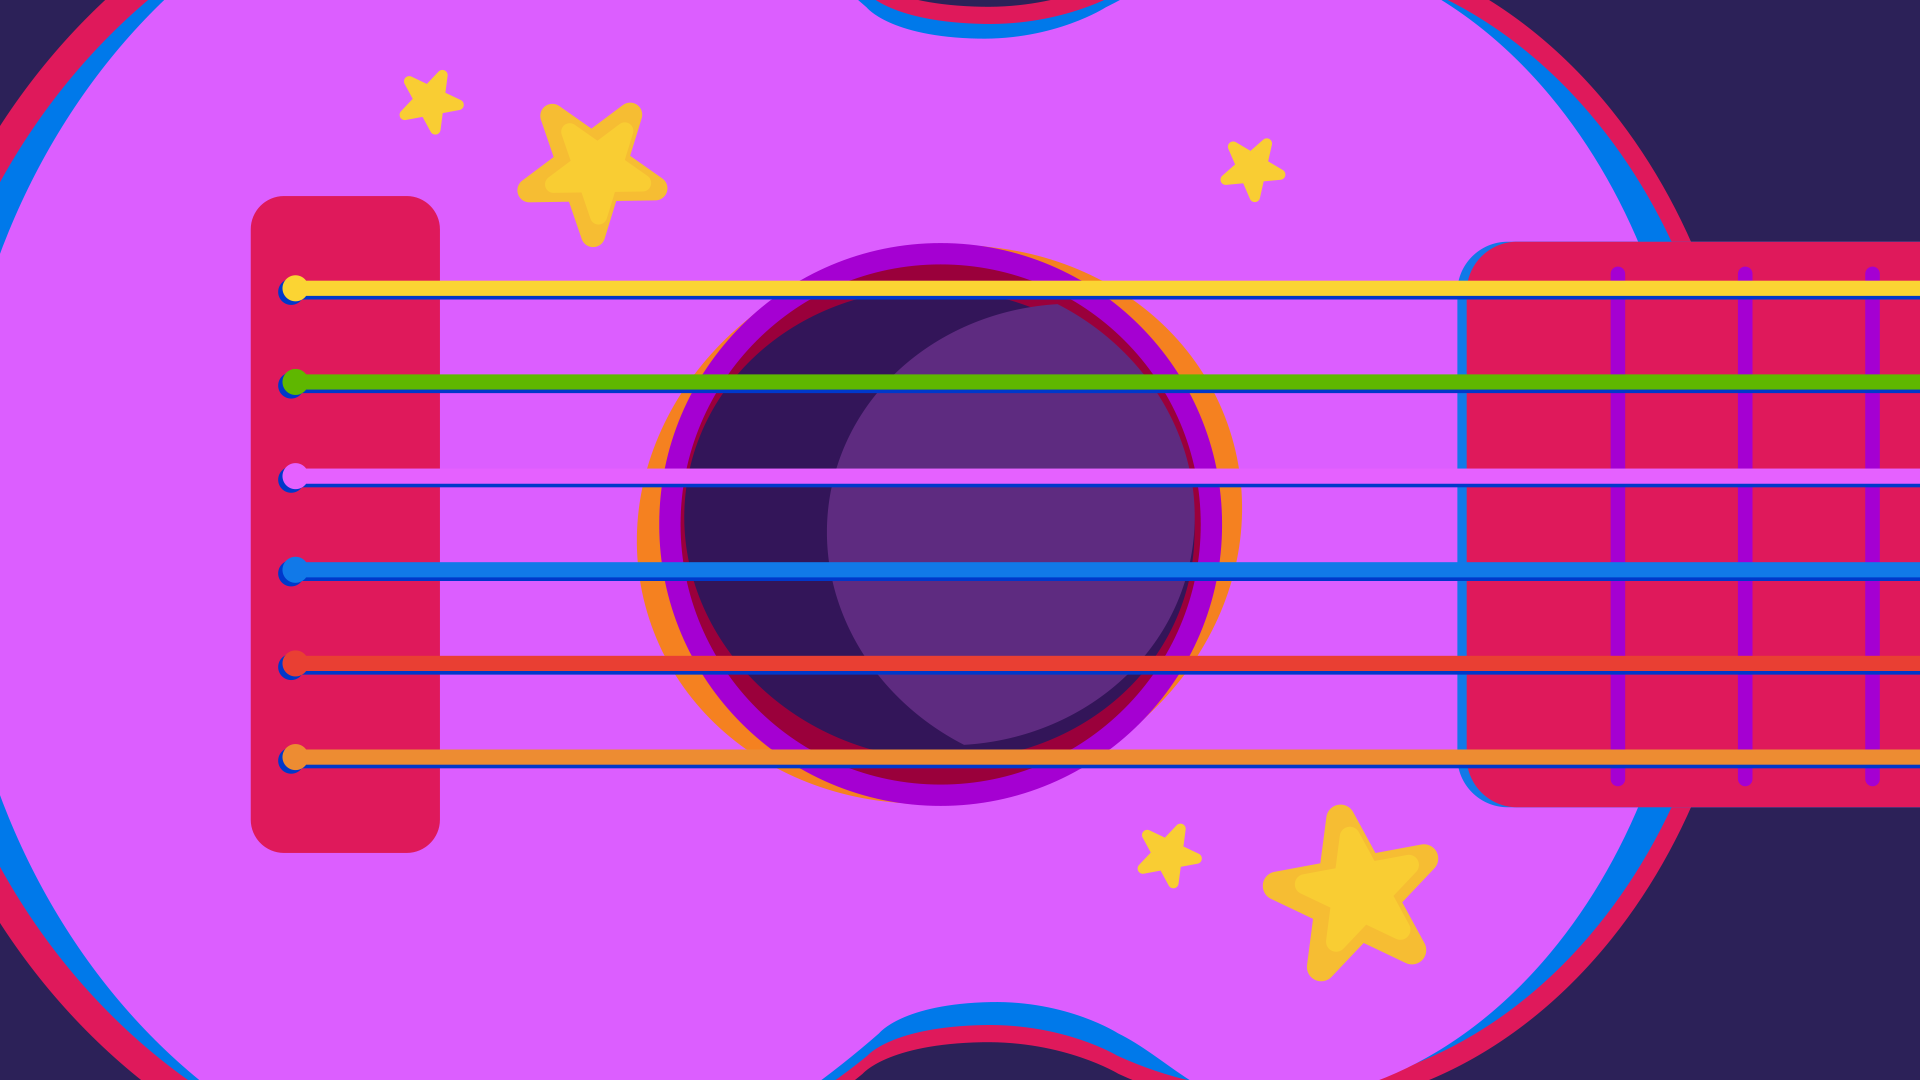 Easy to play guitar game, acoustic